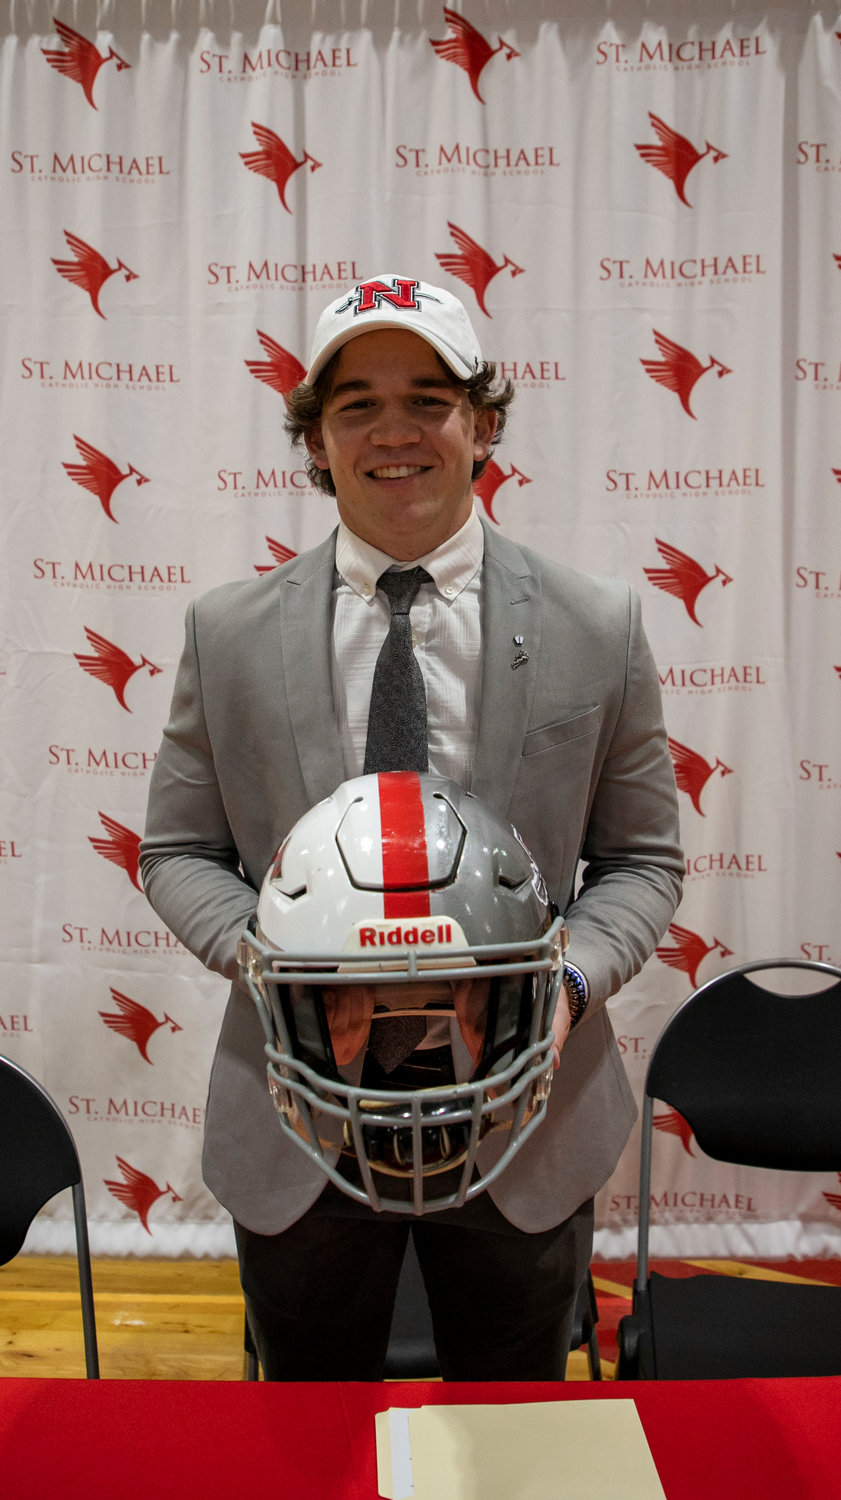 Justin Helper shows off his latest project of a helmet painted half St. Michael colors and half Nicholls State colors during the March 27 signing ceremony at the high school. He said it took him and his father Corey about four hours of painstaking effort to complete.